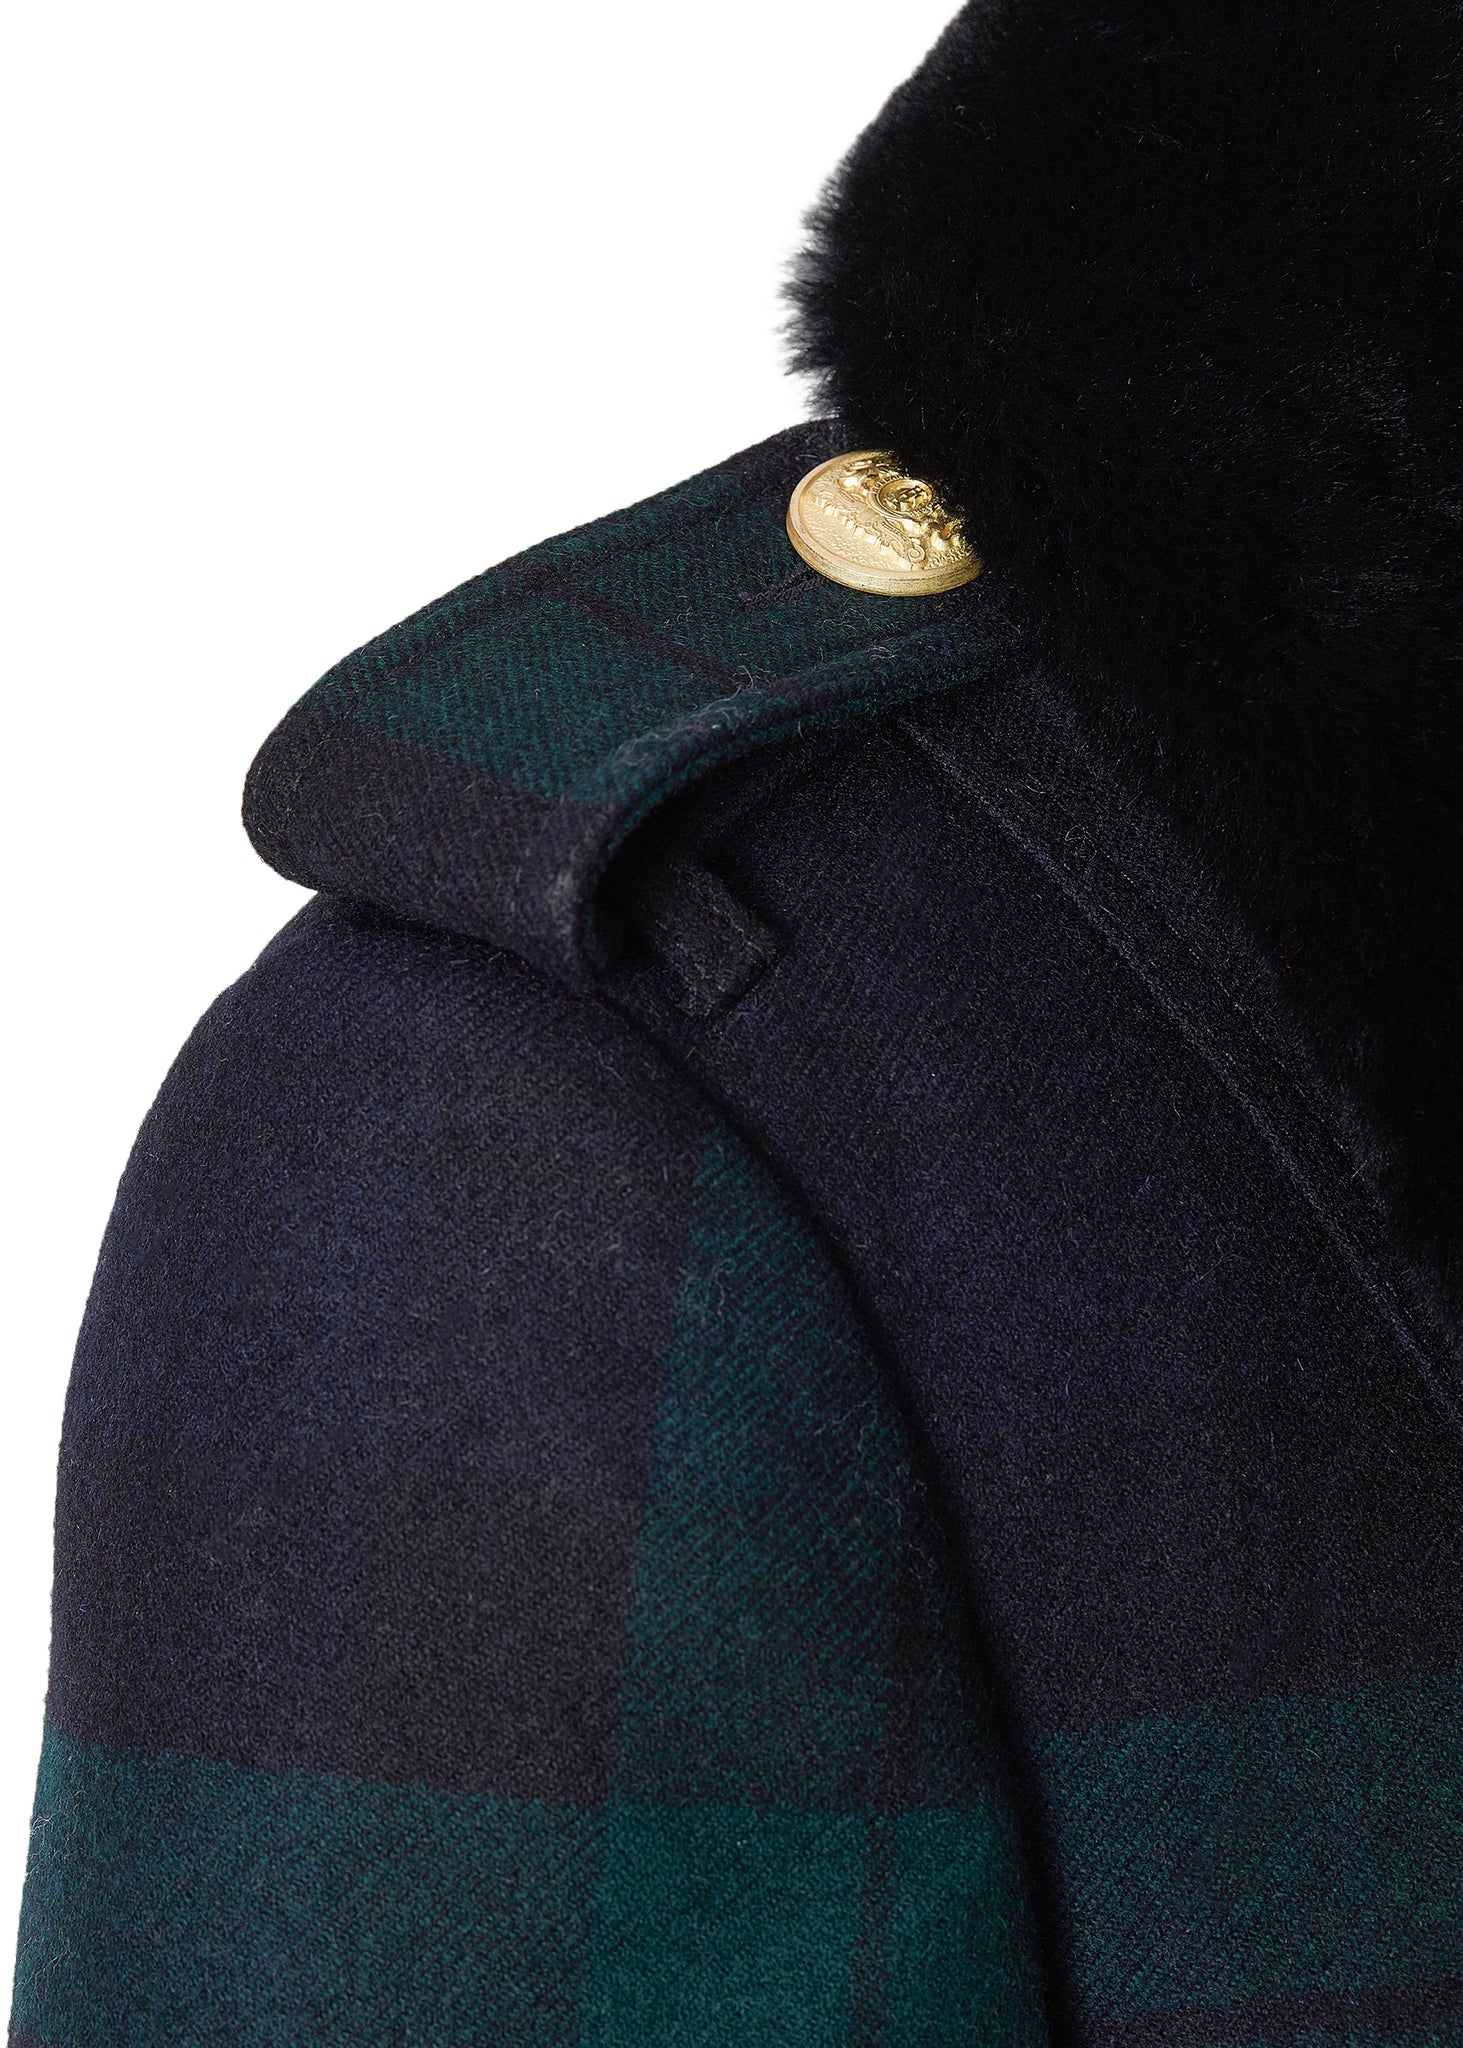 Shoulder detail on womens navy and green blackwatch houndstooth double breasted full length trench coat with black faux fur collar